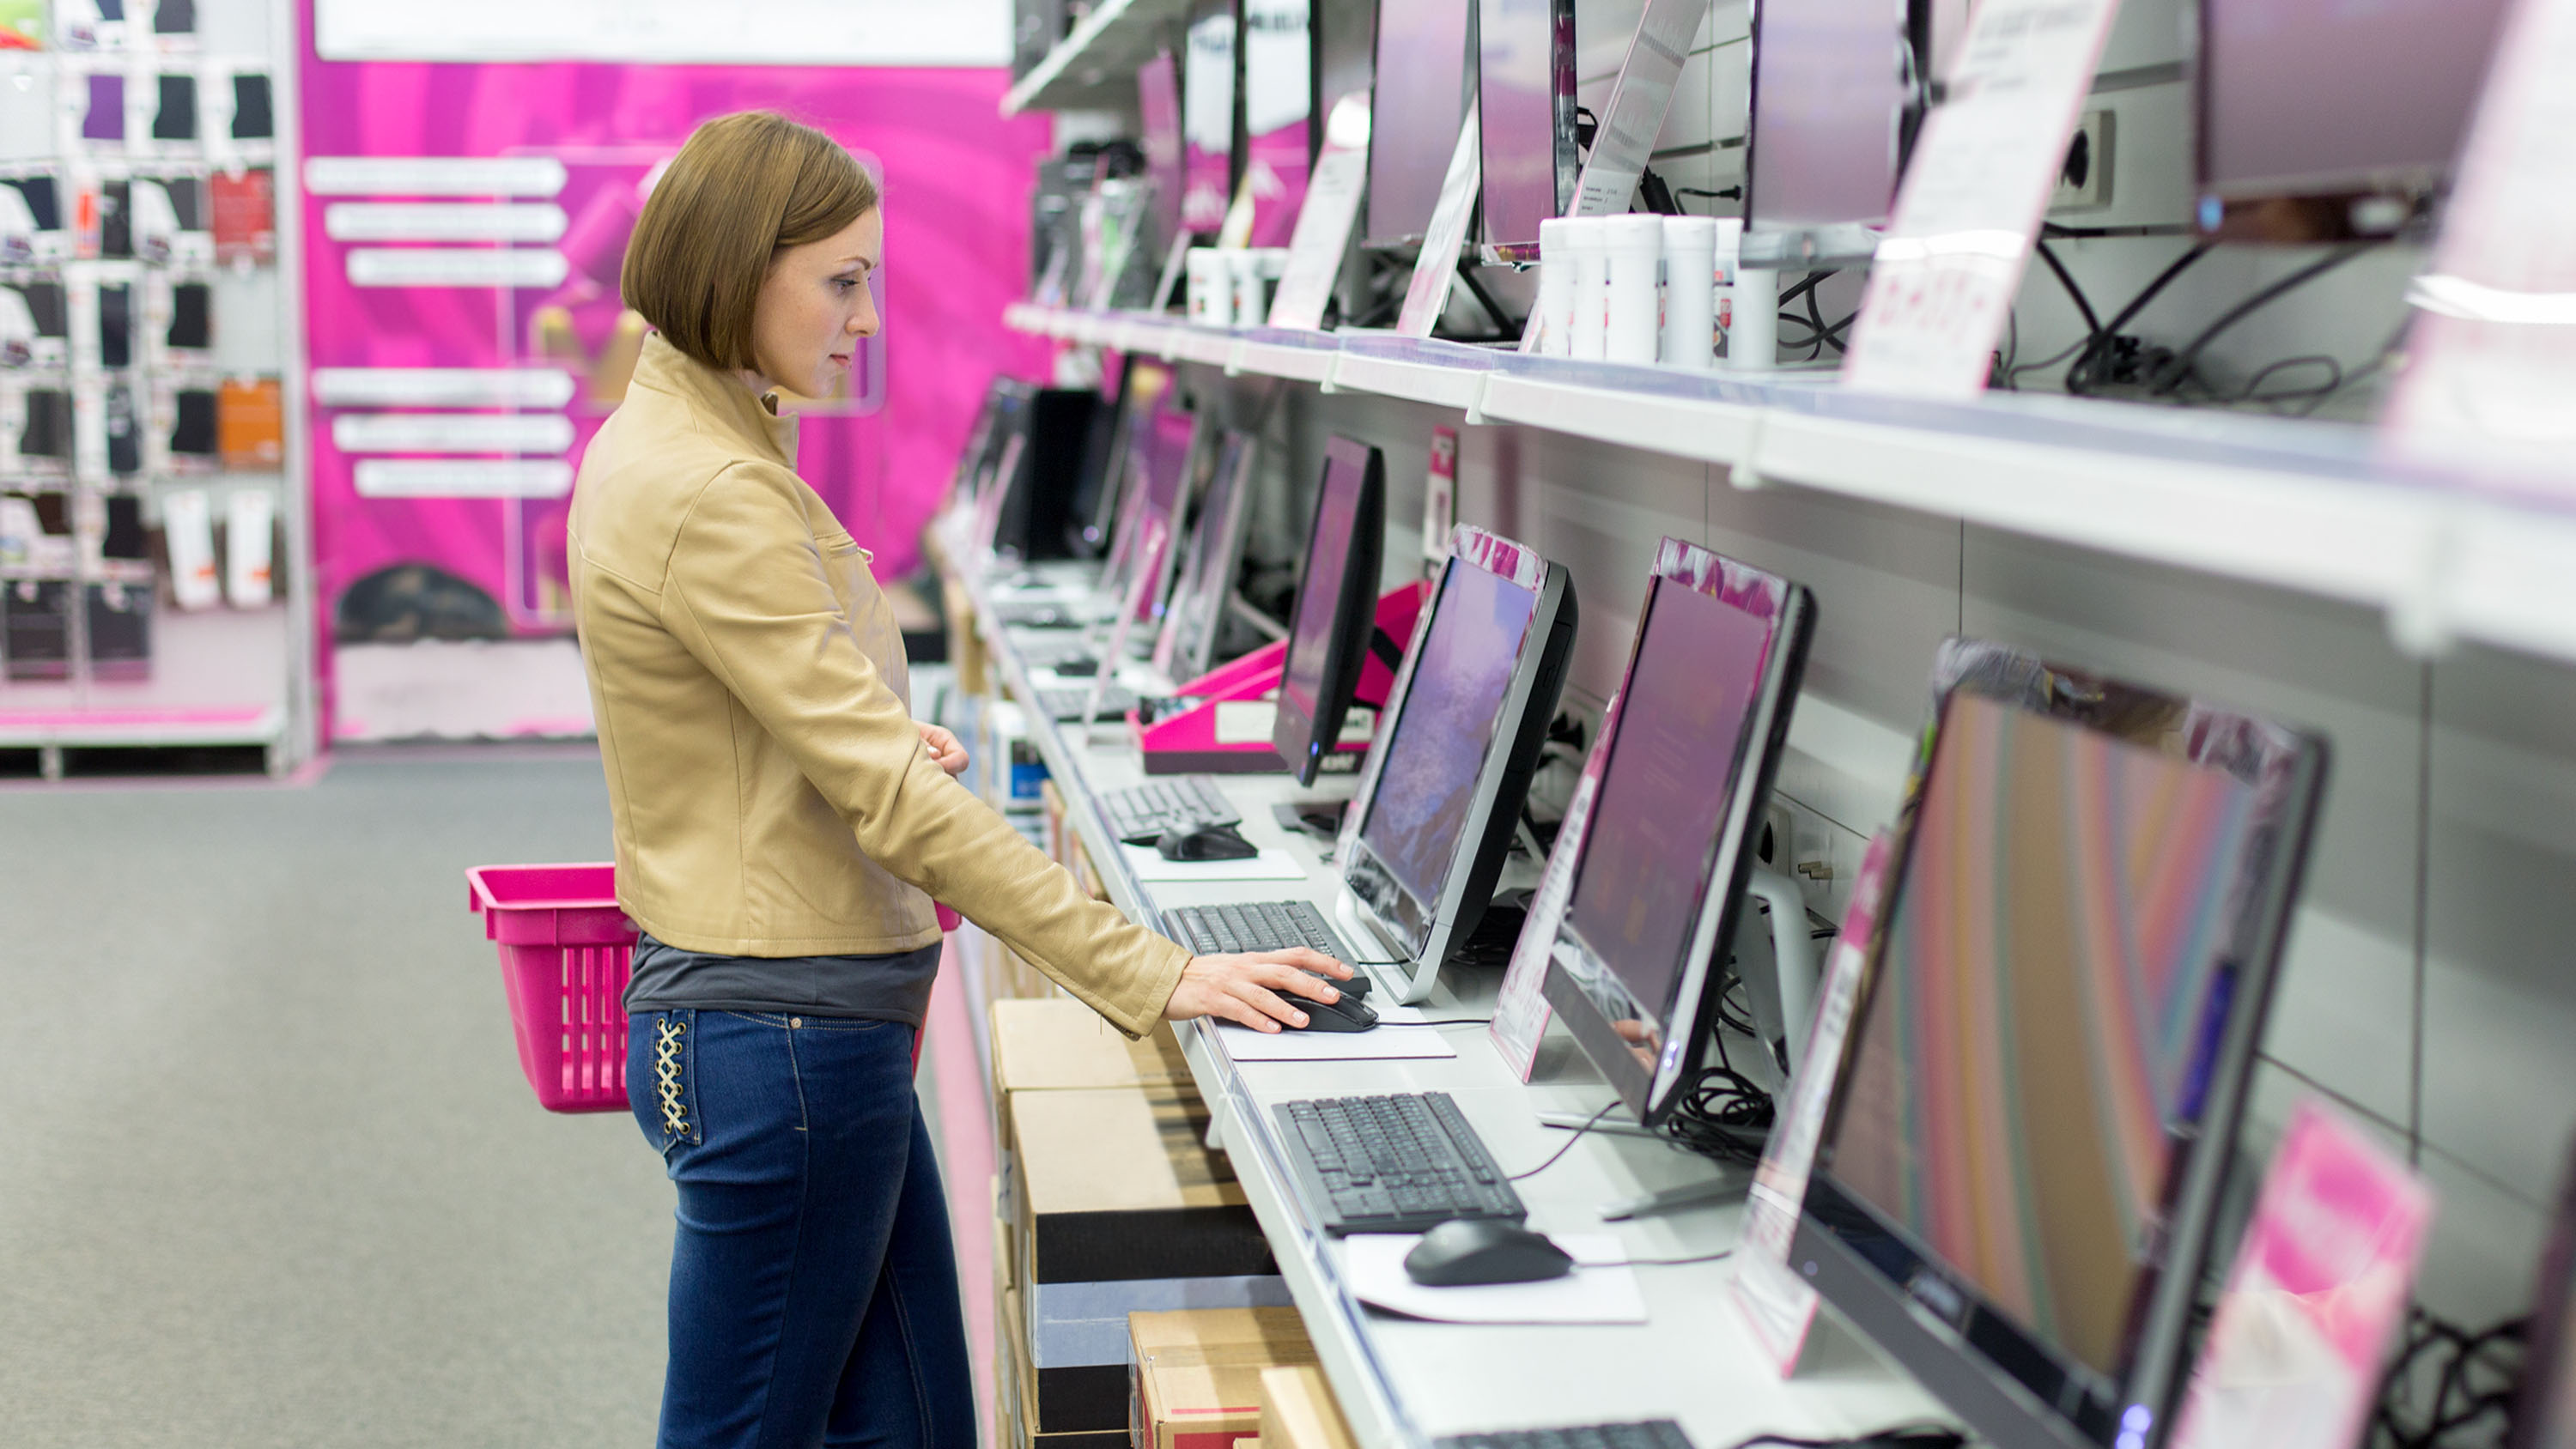 A woman browsing in a PC store